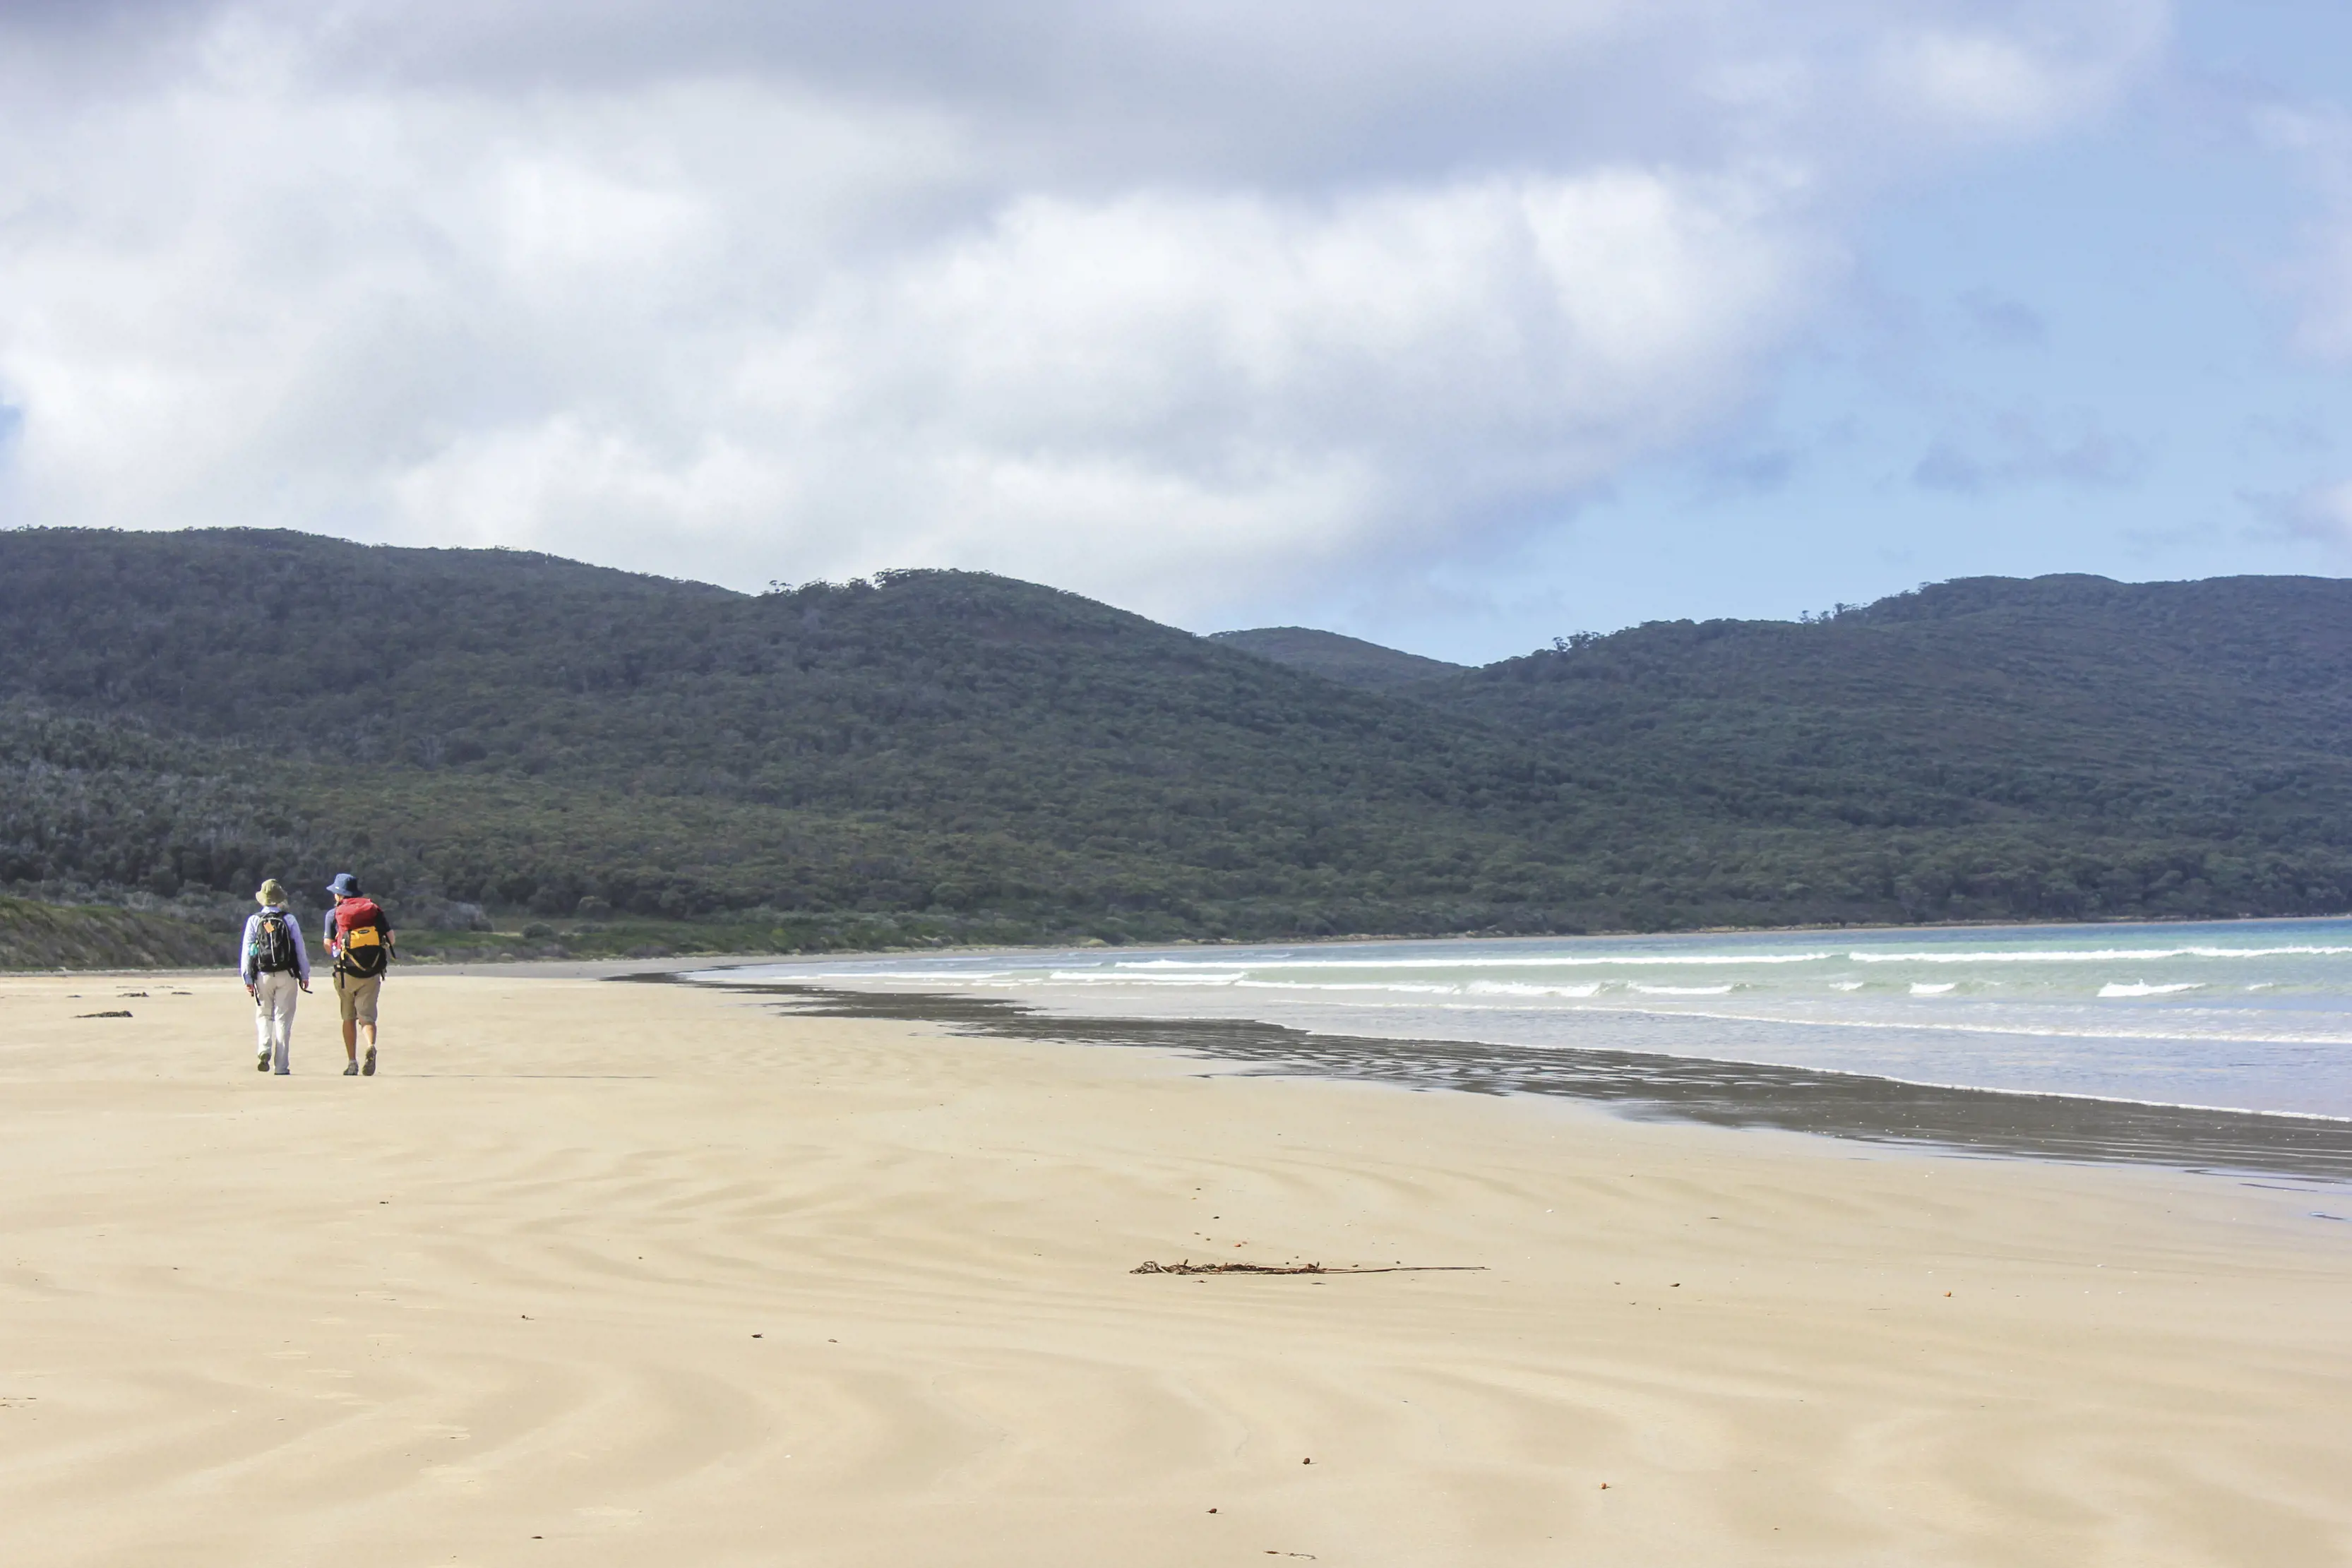 Couple walking along the beach on a beautiful sunny day in Cloudy Bay, Bruny Island.